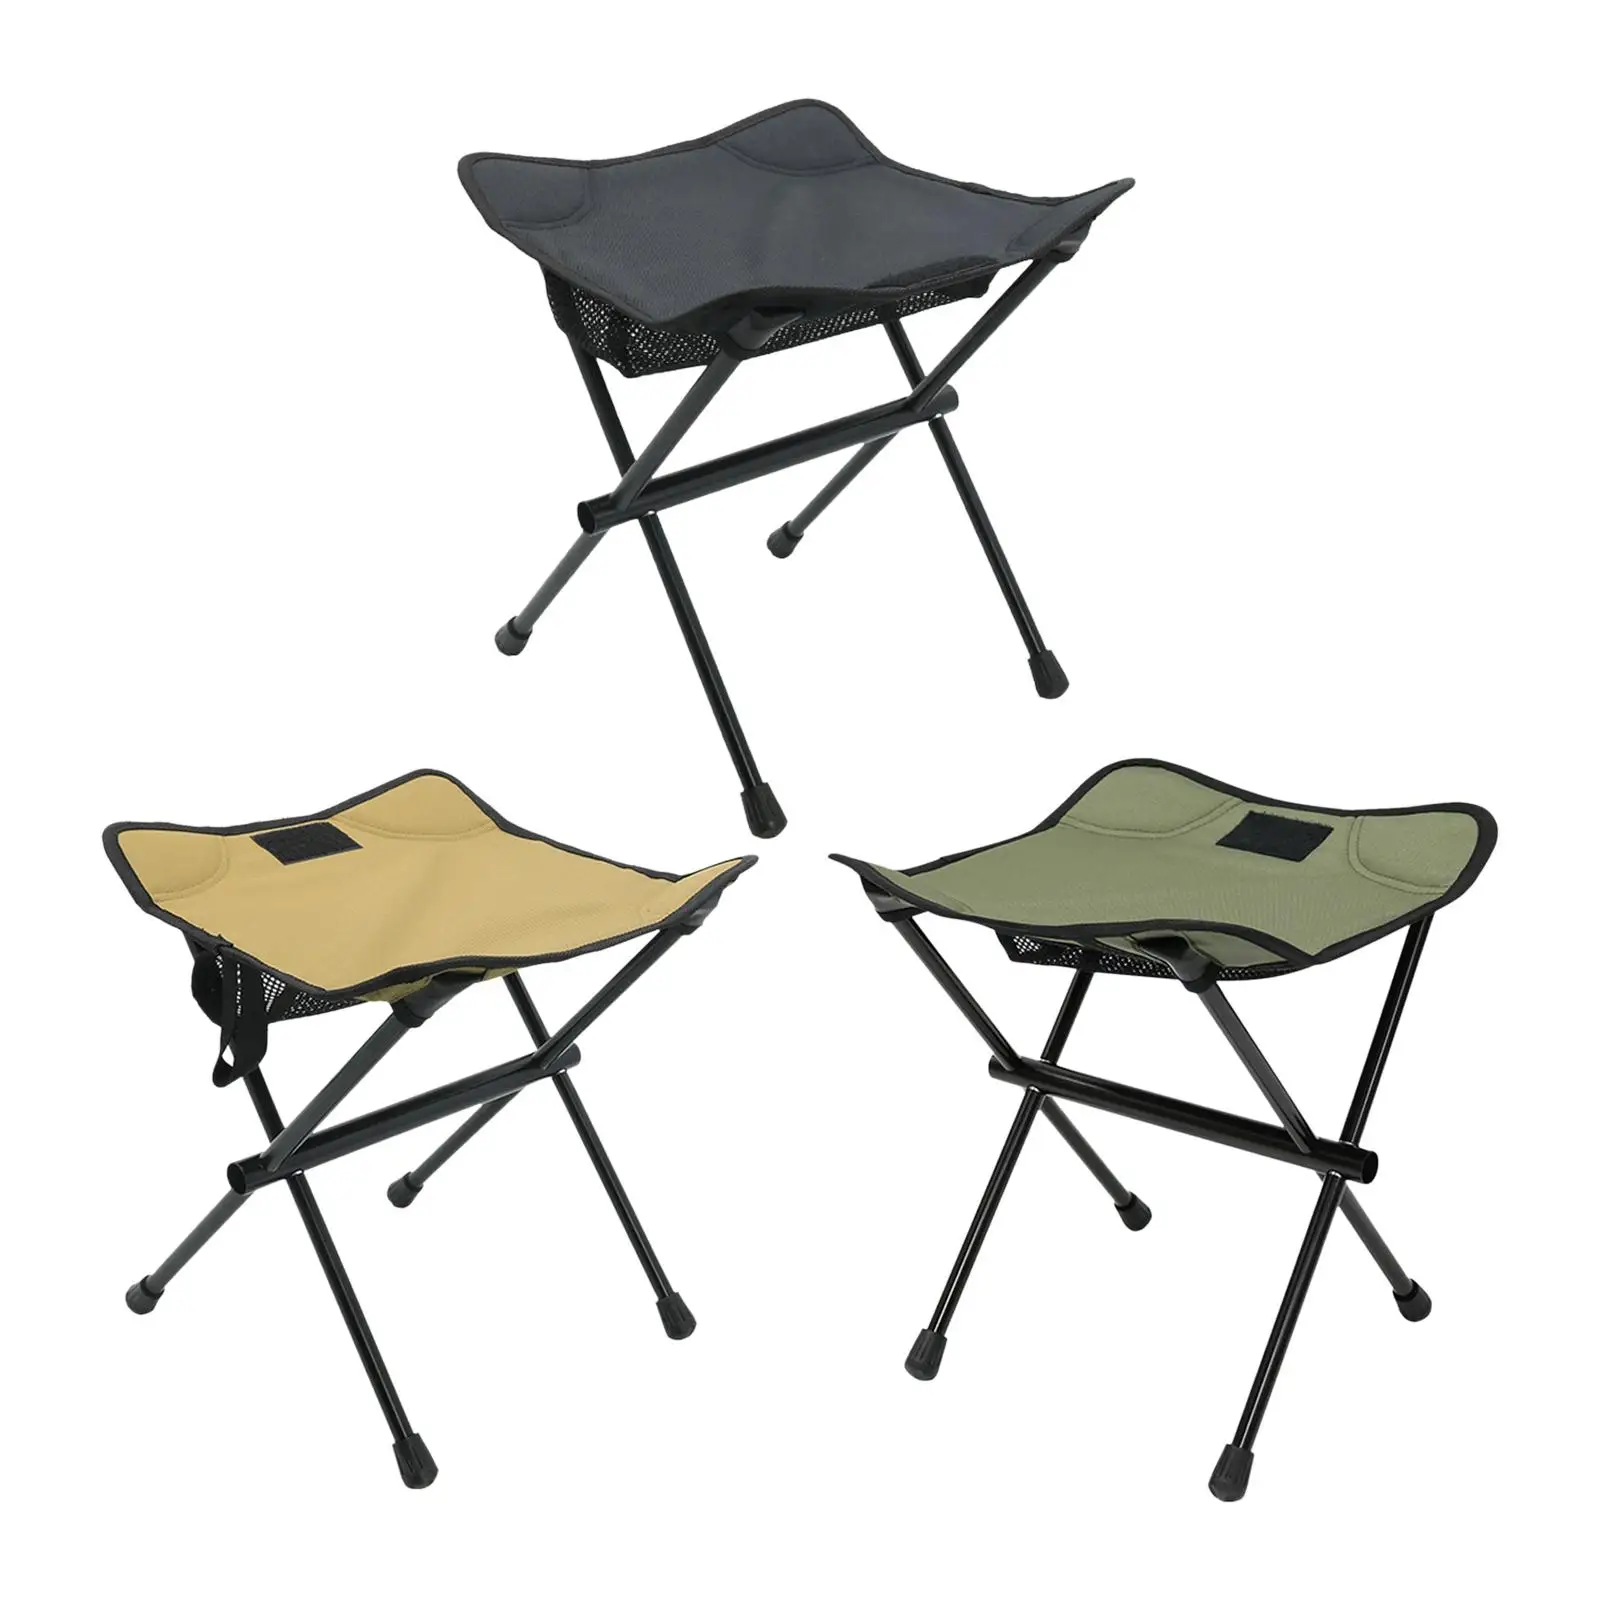 Camping Fold Fishing Chair Footrest Portable Compact Saddle Chair Collapsible